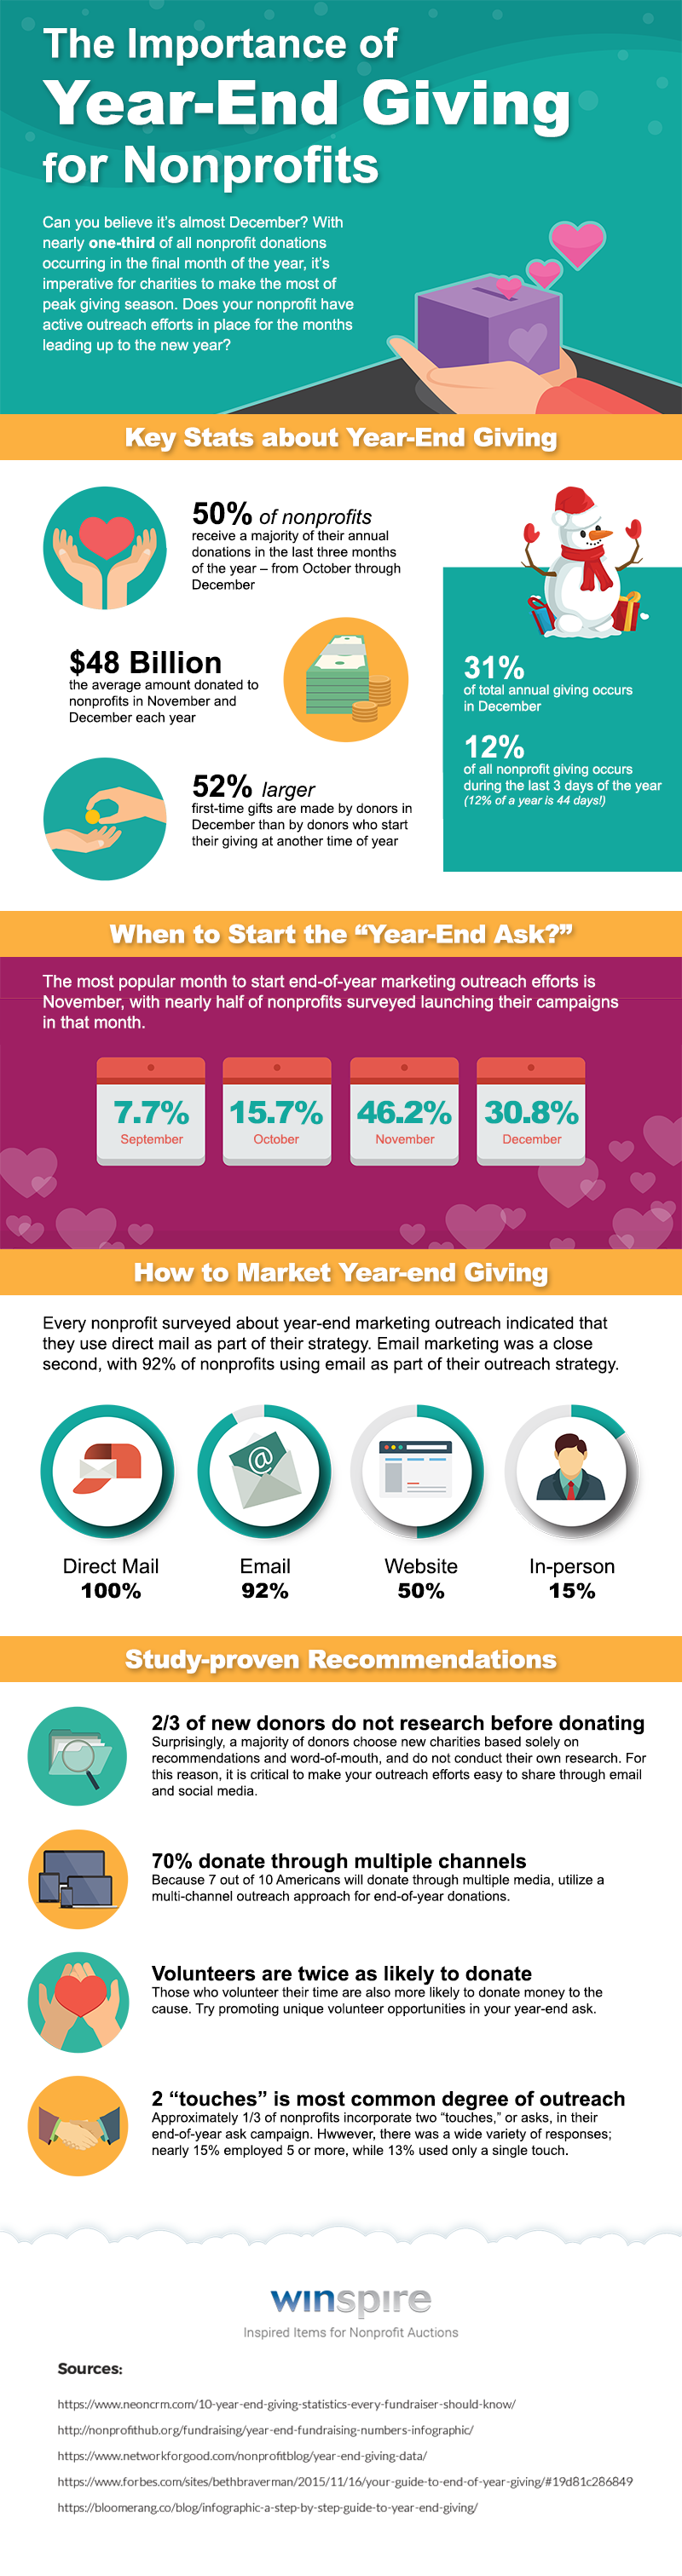 The Importance of Year End Giving Infographic by Winspire